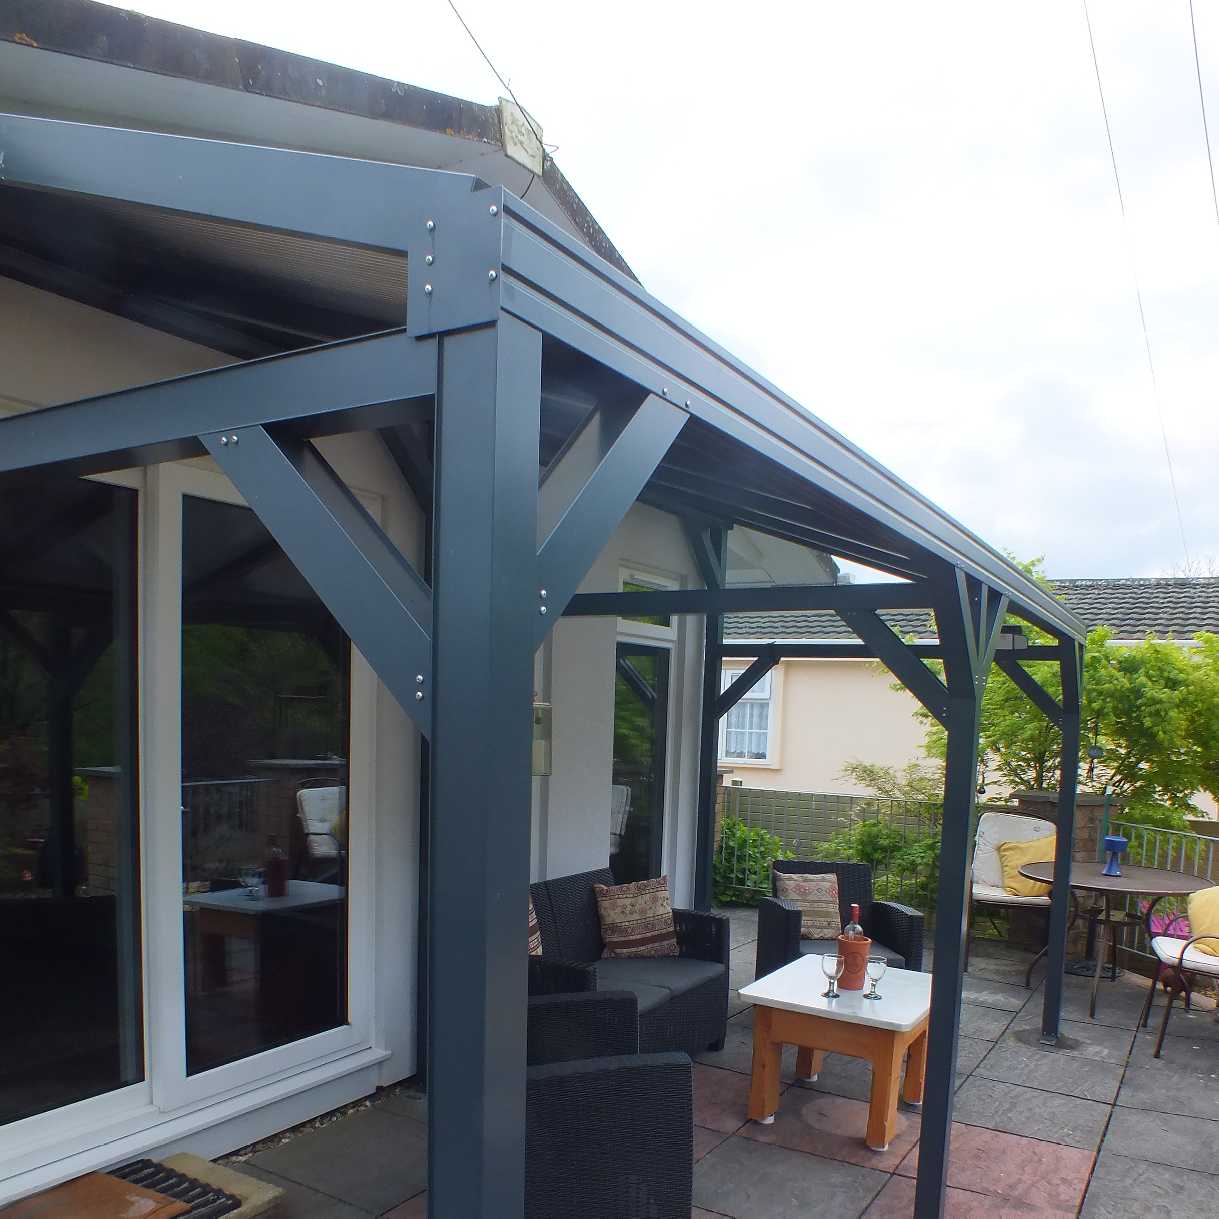 Affordable Omega Smart Free-Standing, Anthracite Grey MonoPitch Roof Canopy with 16mm Polycarbonate Glazing - 7.8m (W) x 3.5m (P), (8) Supporting Posts